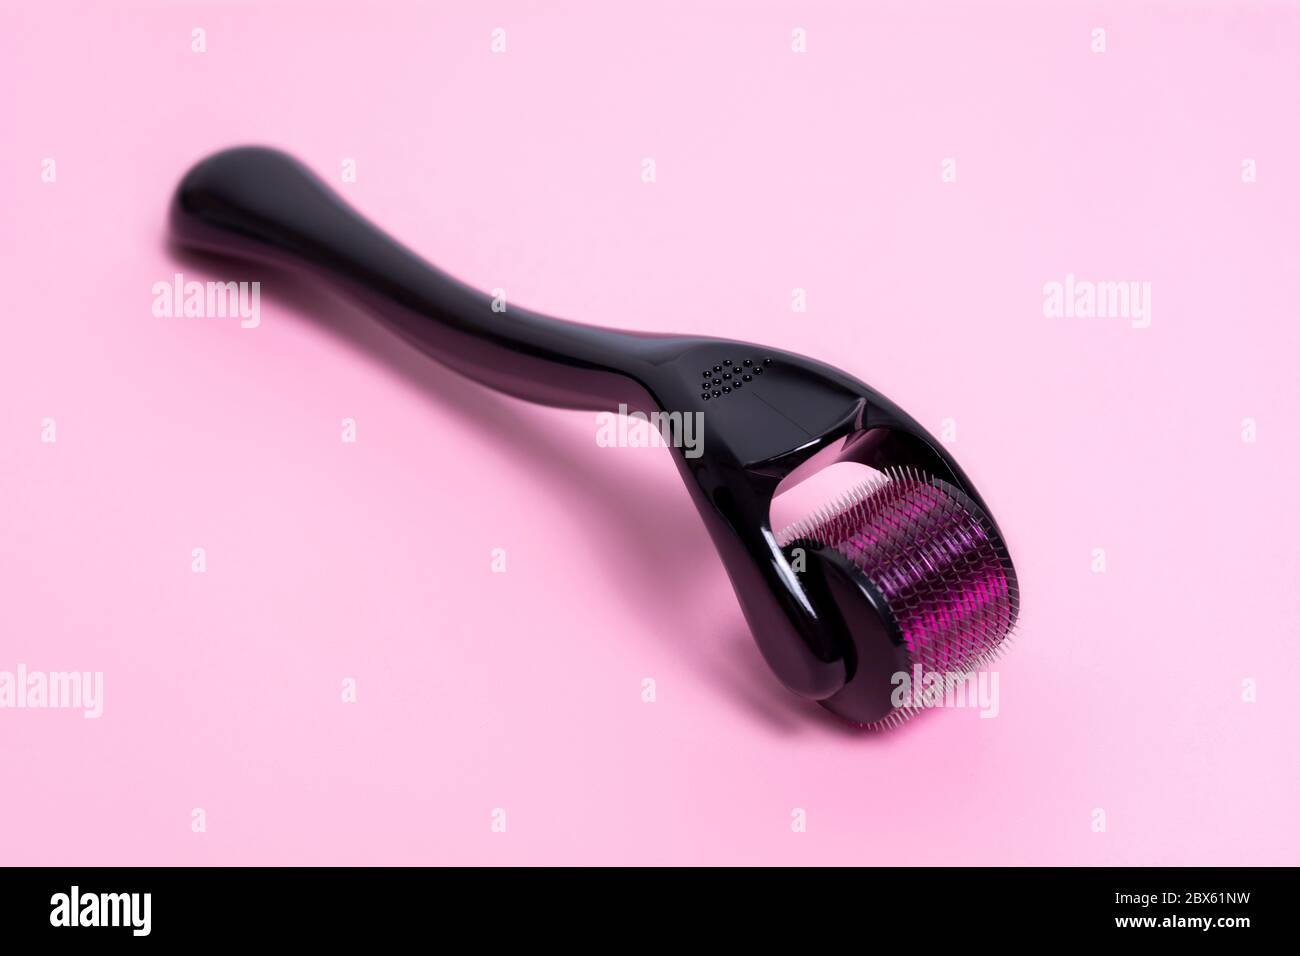 Derma roller on a pink background. The device for cosmetic procedures of mesotherapy. Stock Photo